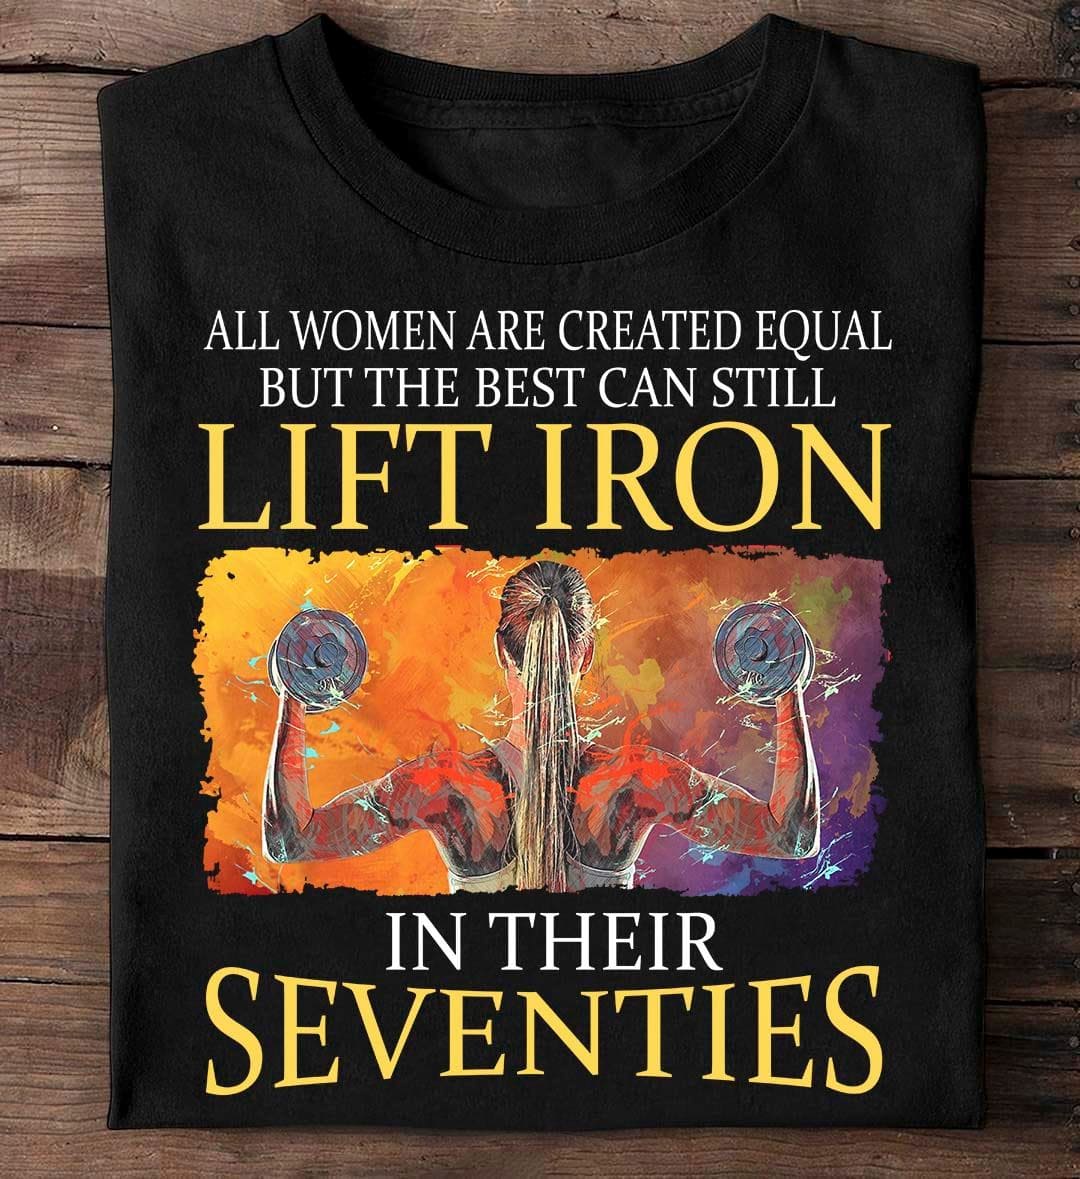 All women are created equal, but the best can still lift iron in their seventies - Strong women lifting weights